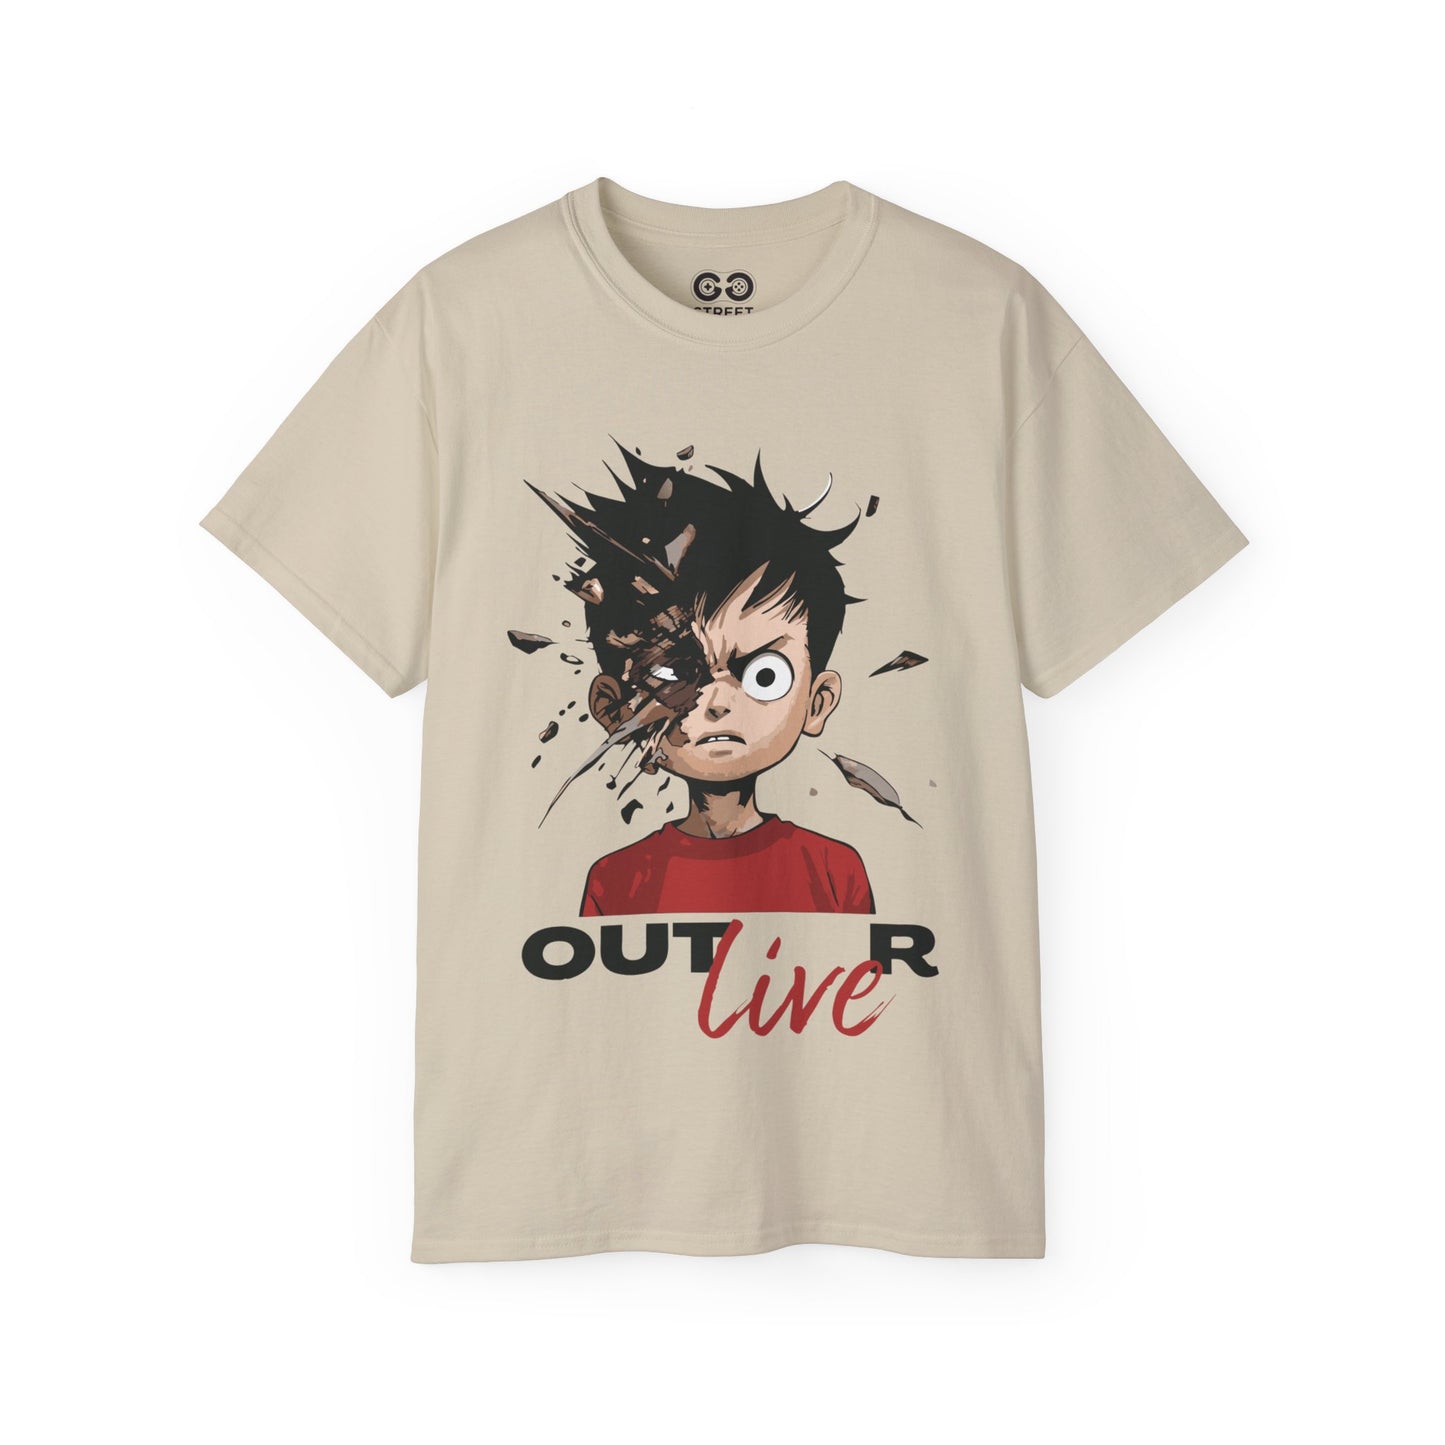 OUTLIVER - Unisex Ultra Cotton Tee